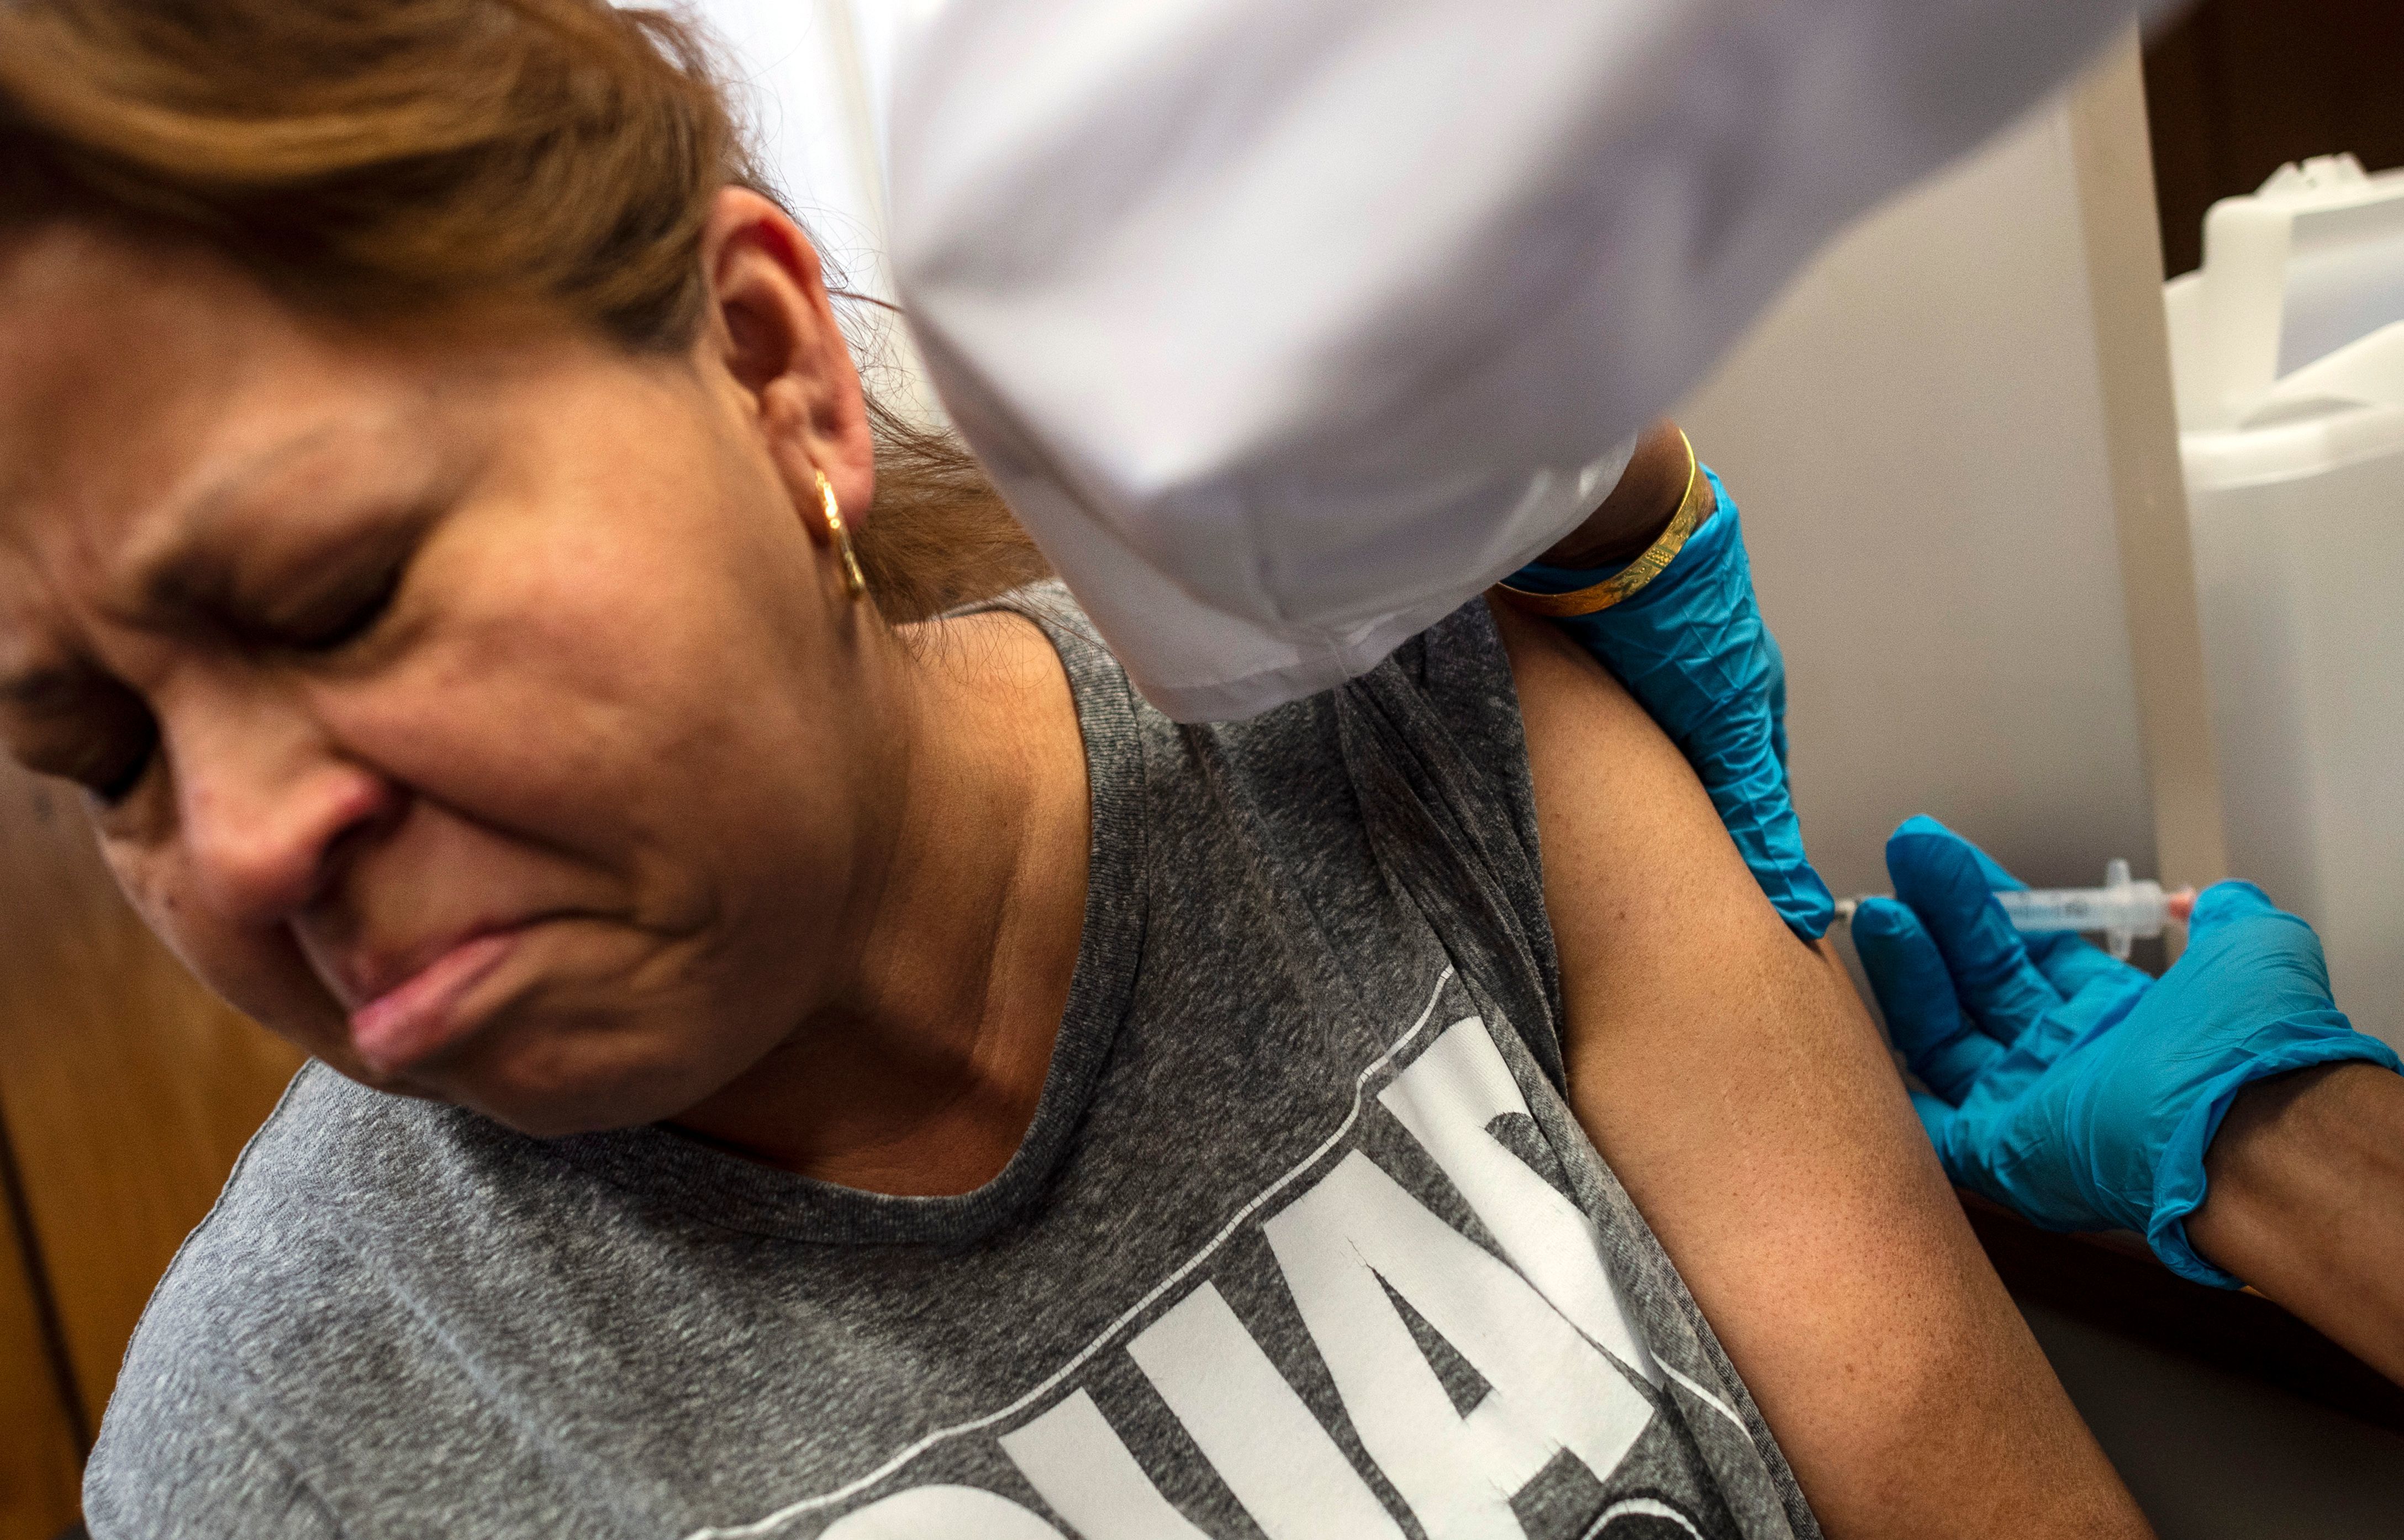 US measles cases surpass 1,000 for 2019